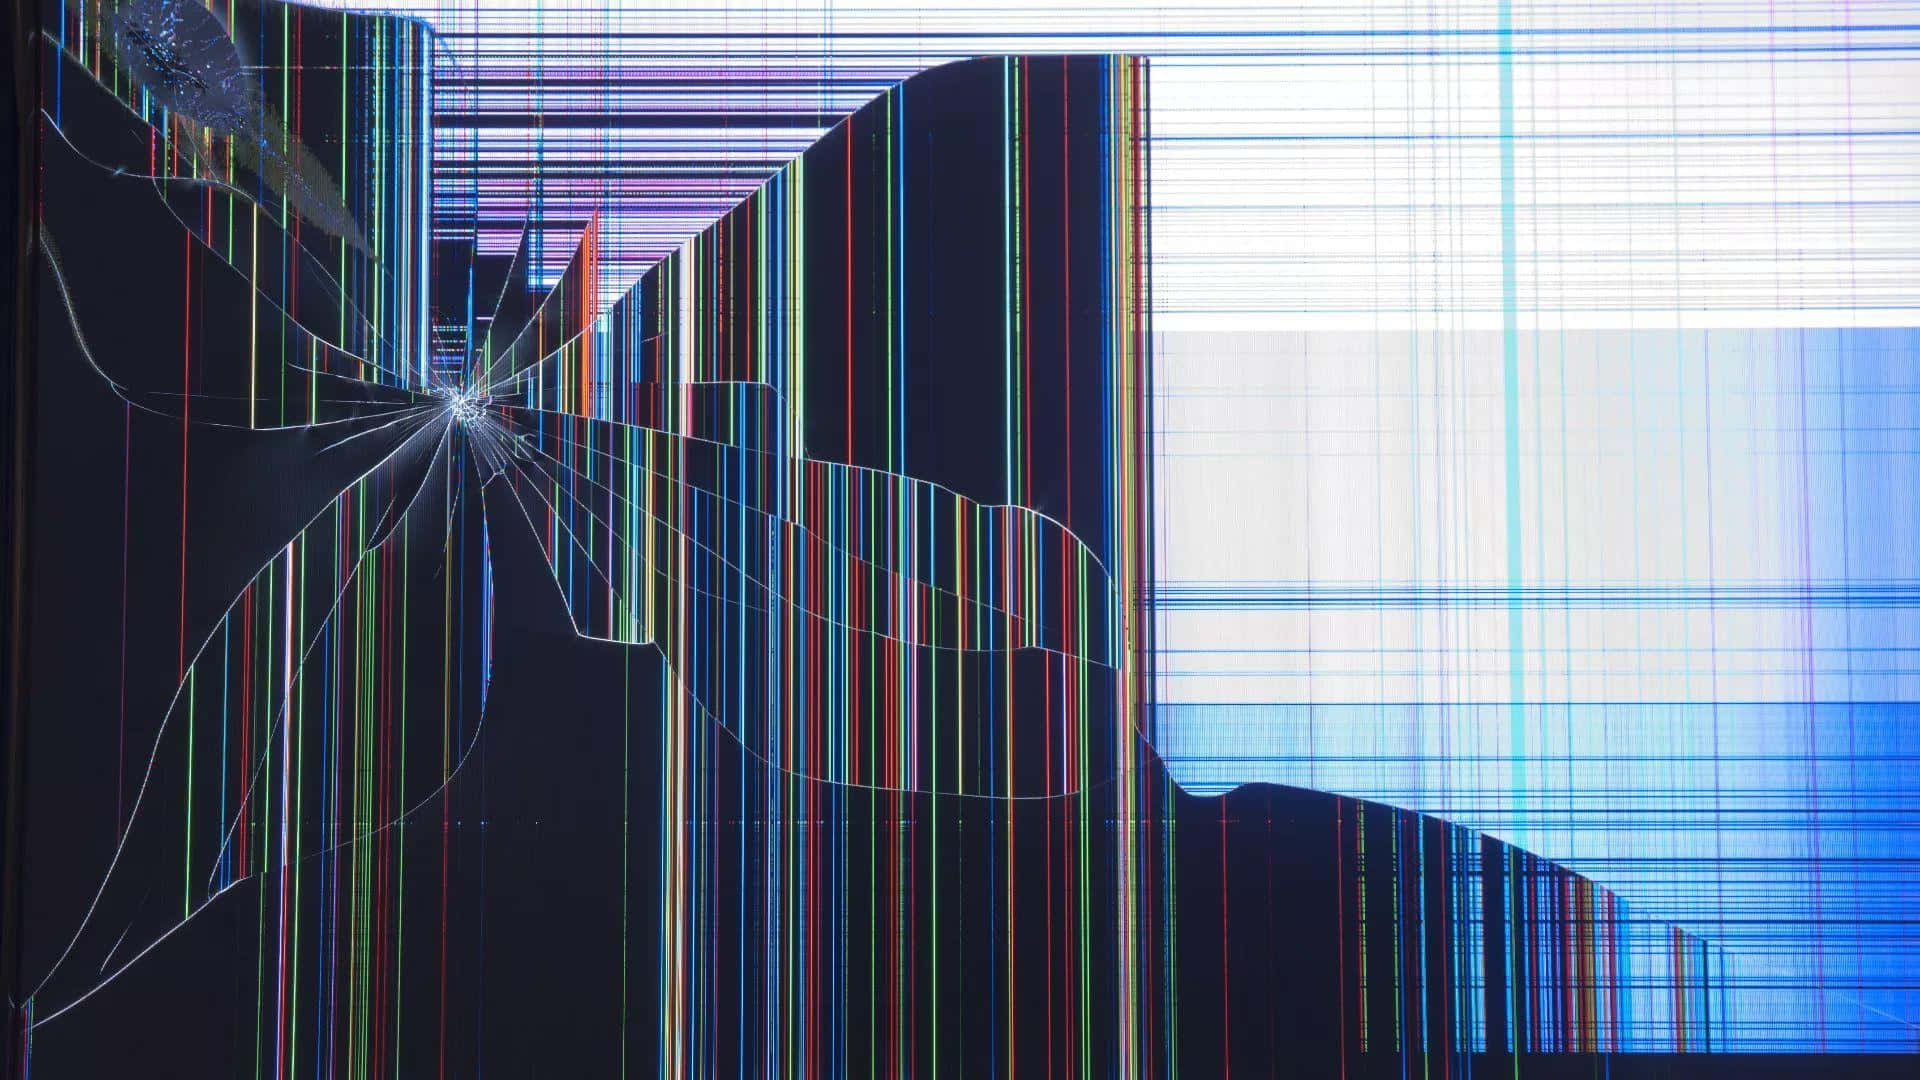 "Computer on the Ground after a Malfunction" Wallpaper